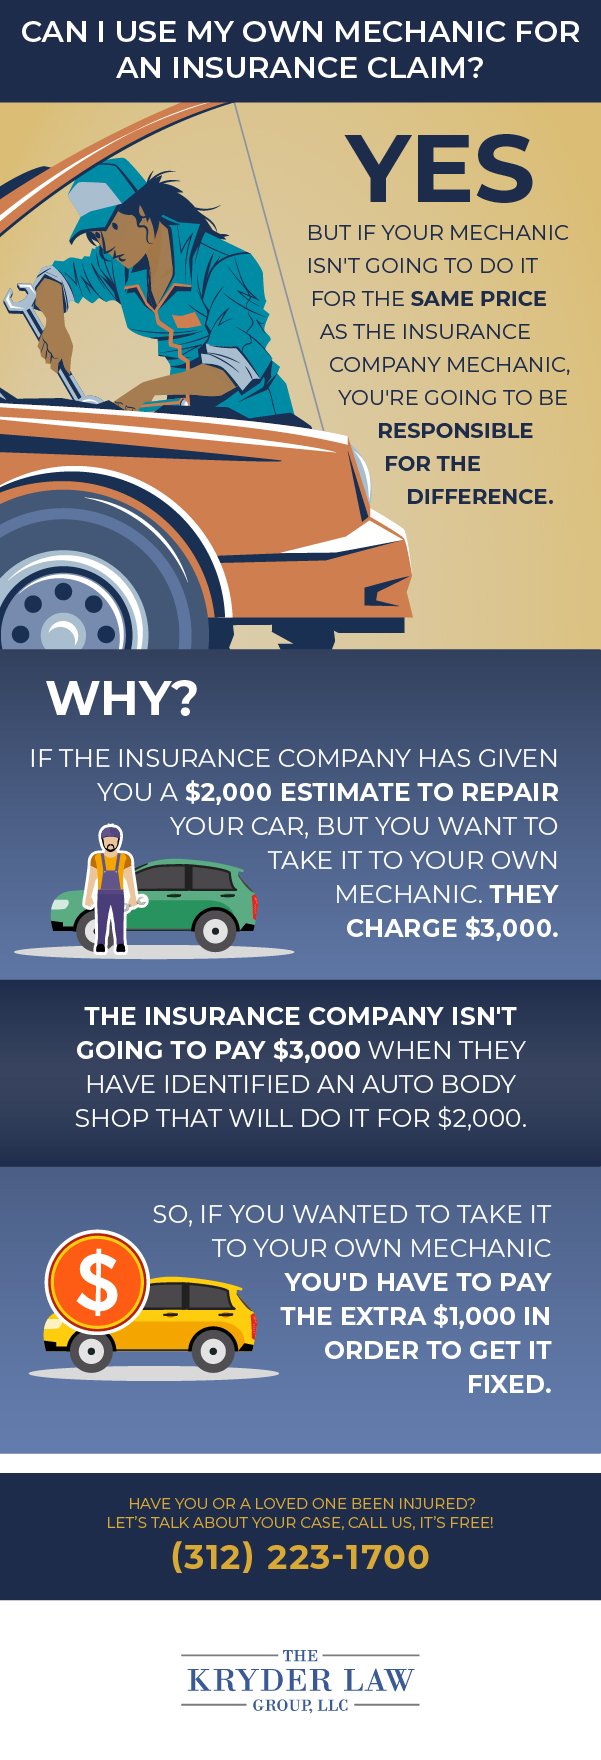 Can I Use My Own Mechanic for an Insurance Claim?